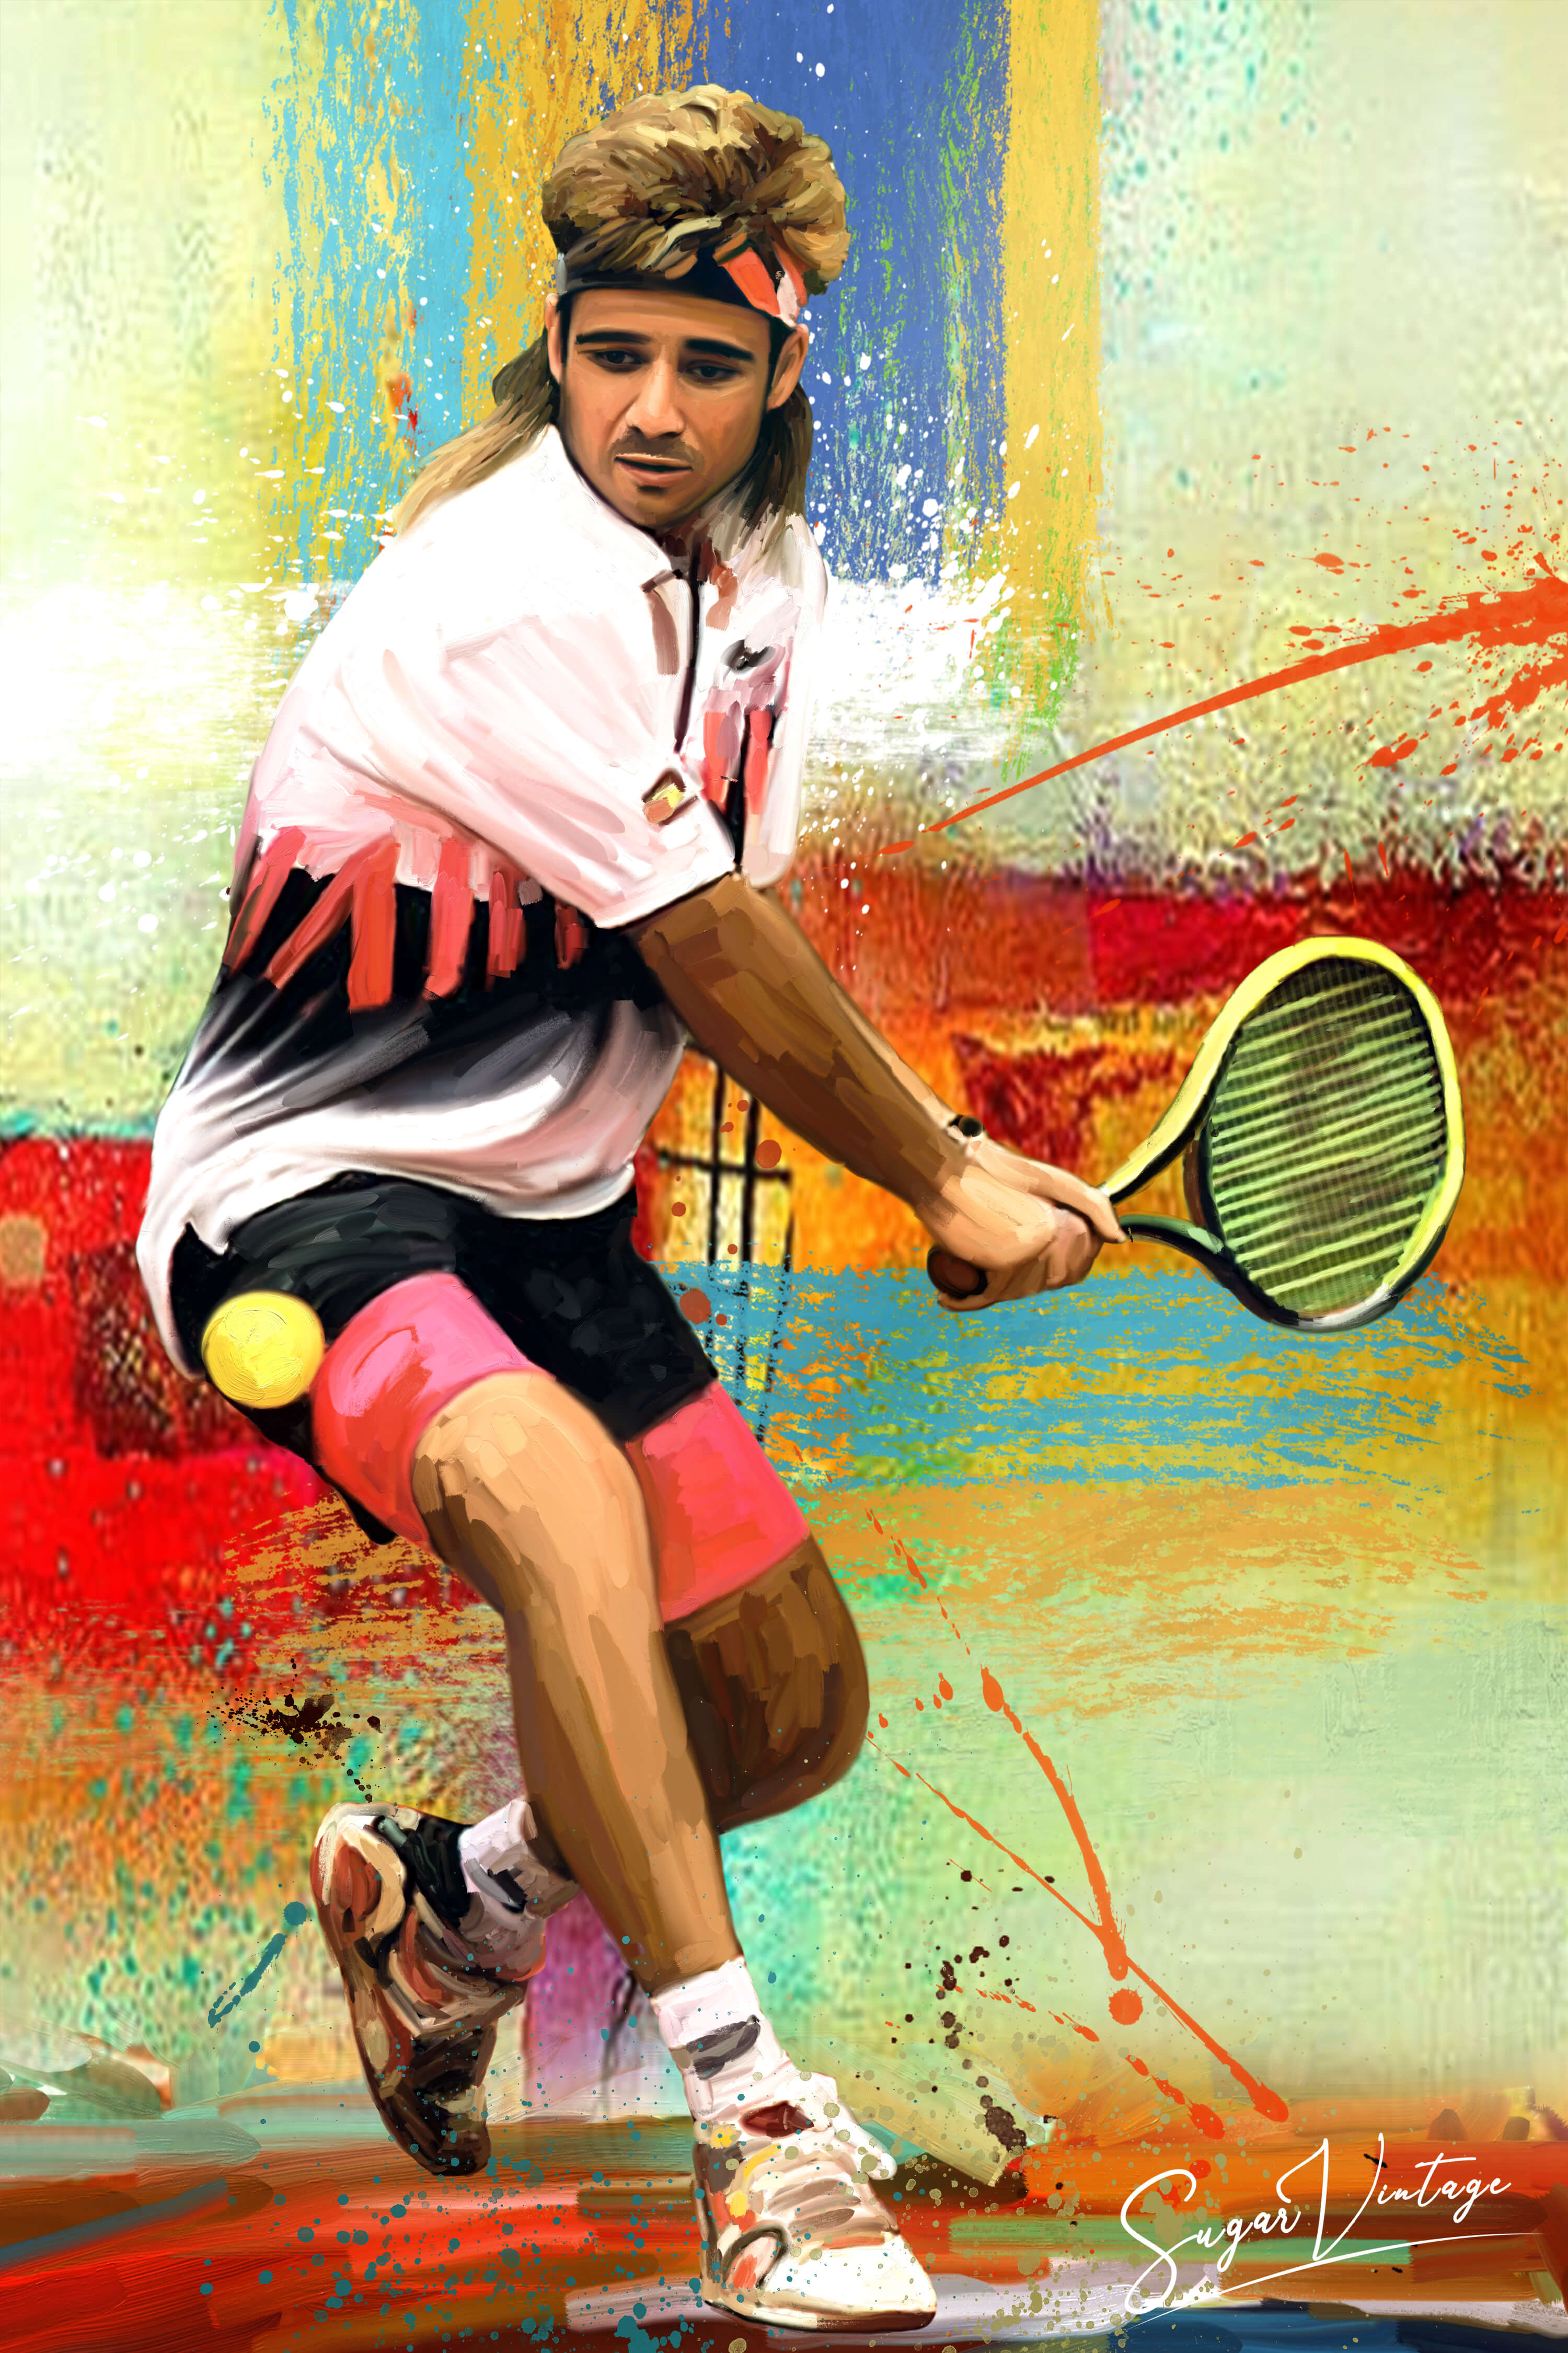 The Legendary Series "Agassi"